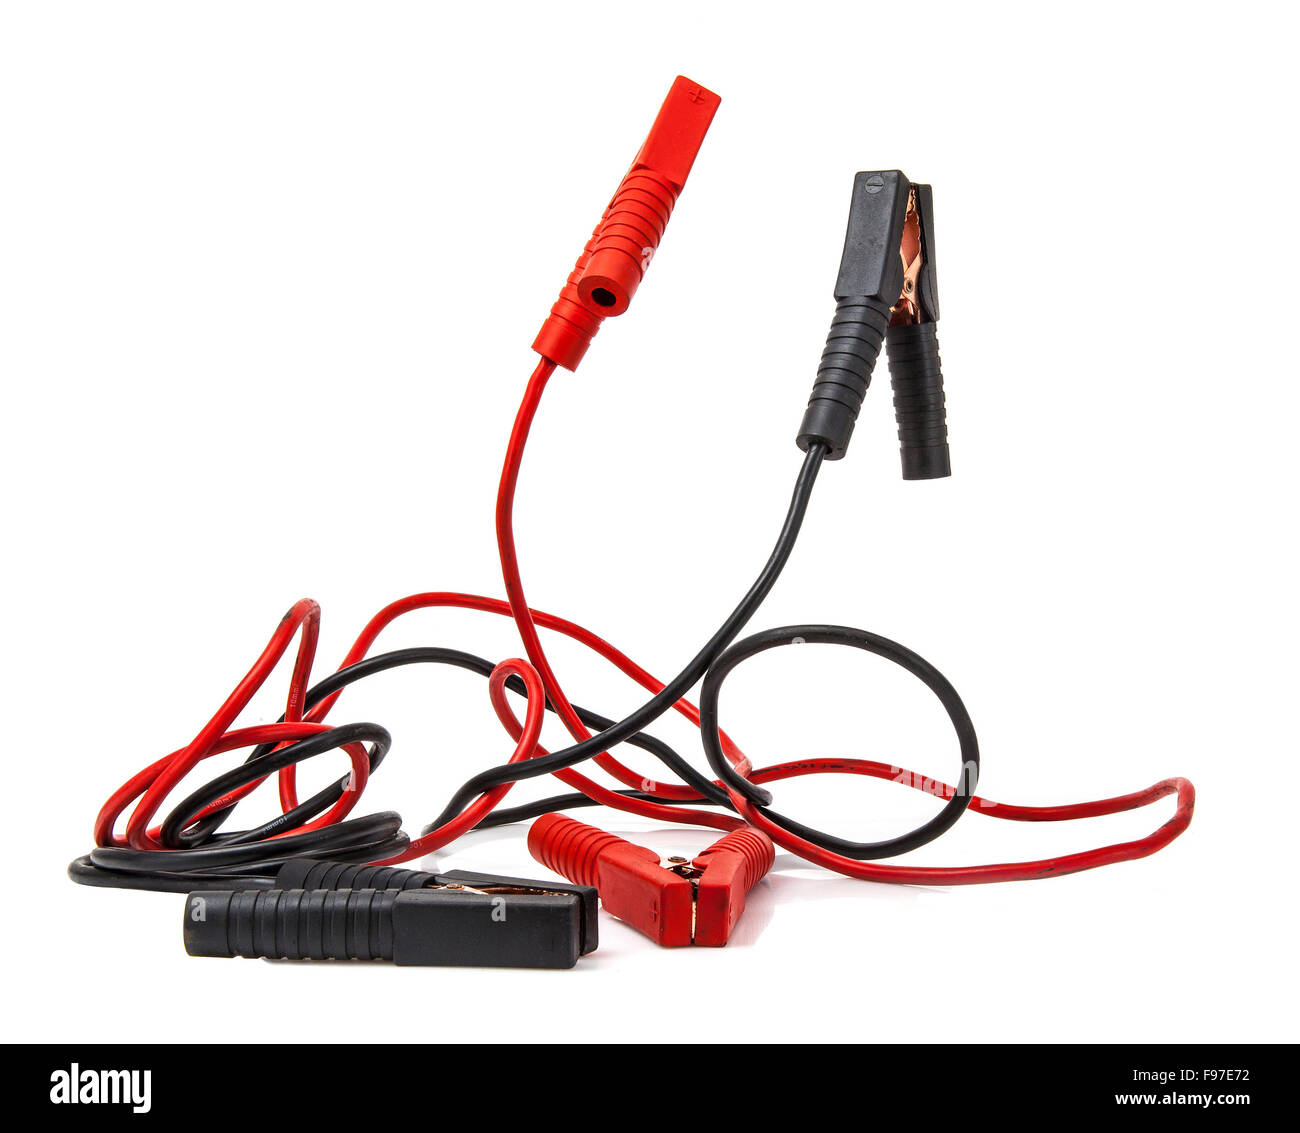 Car battery jumper cables over white background Stock Photo